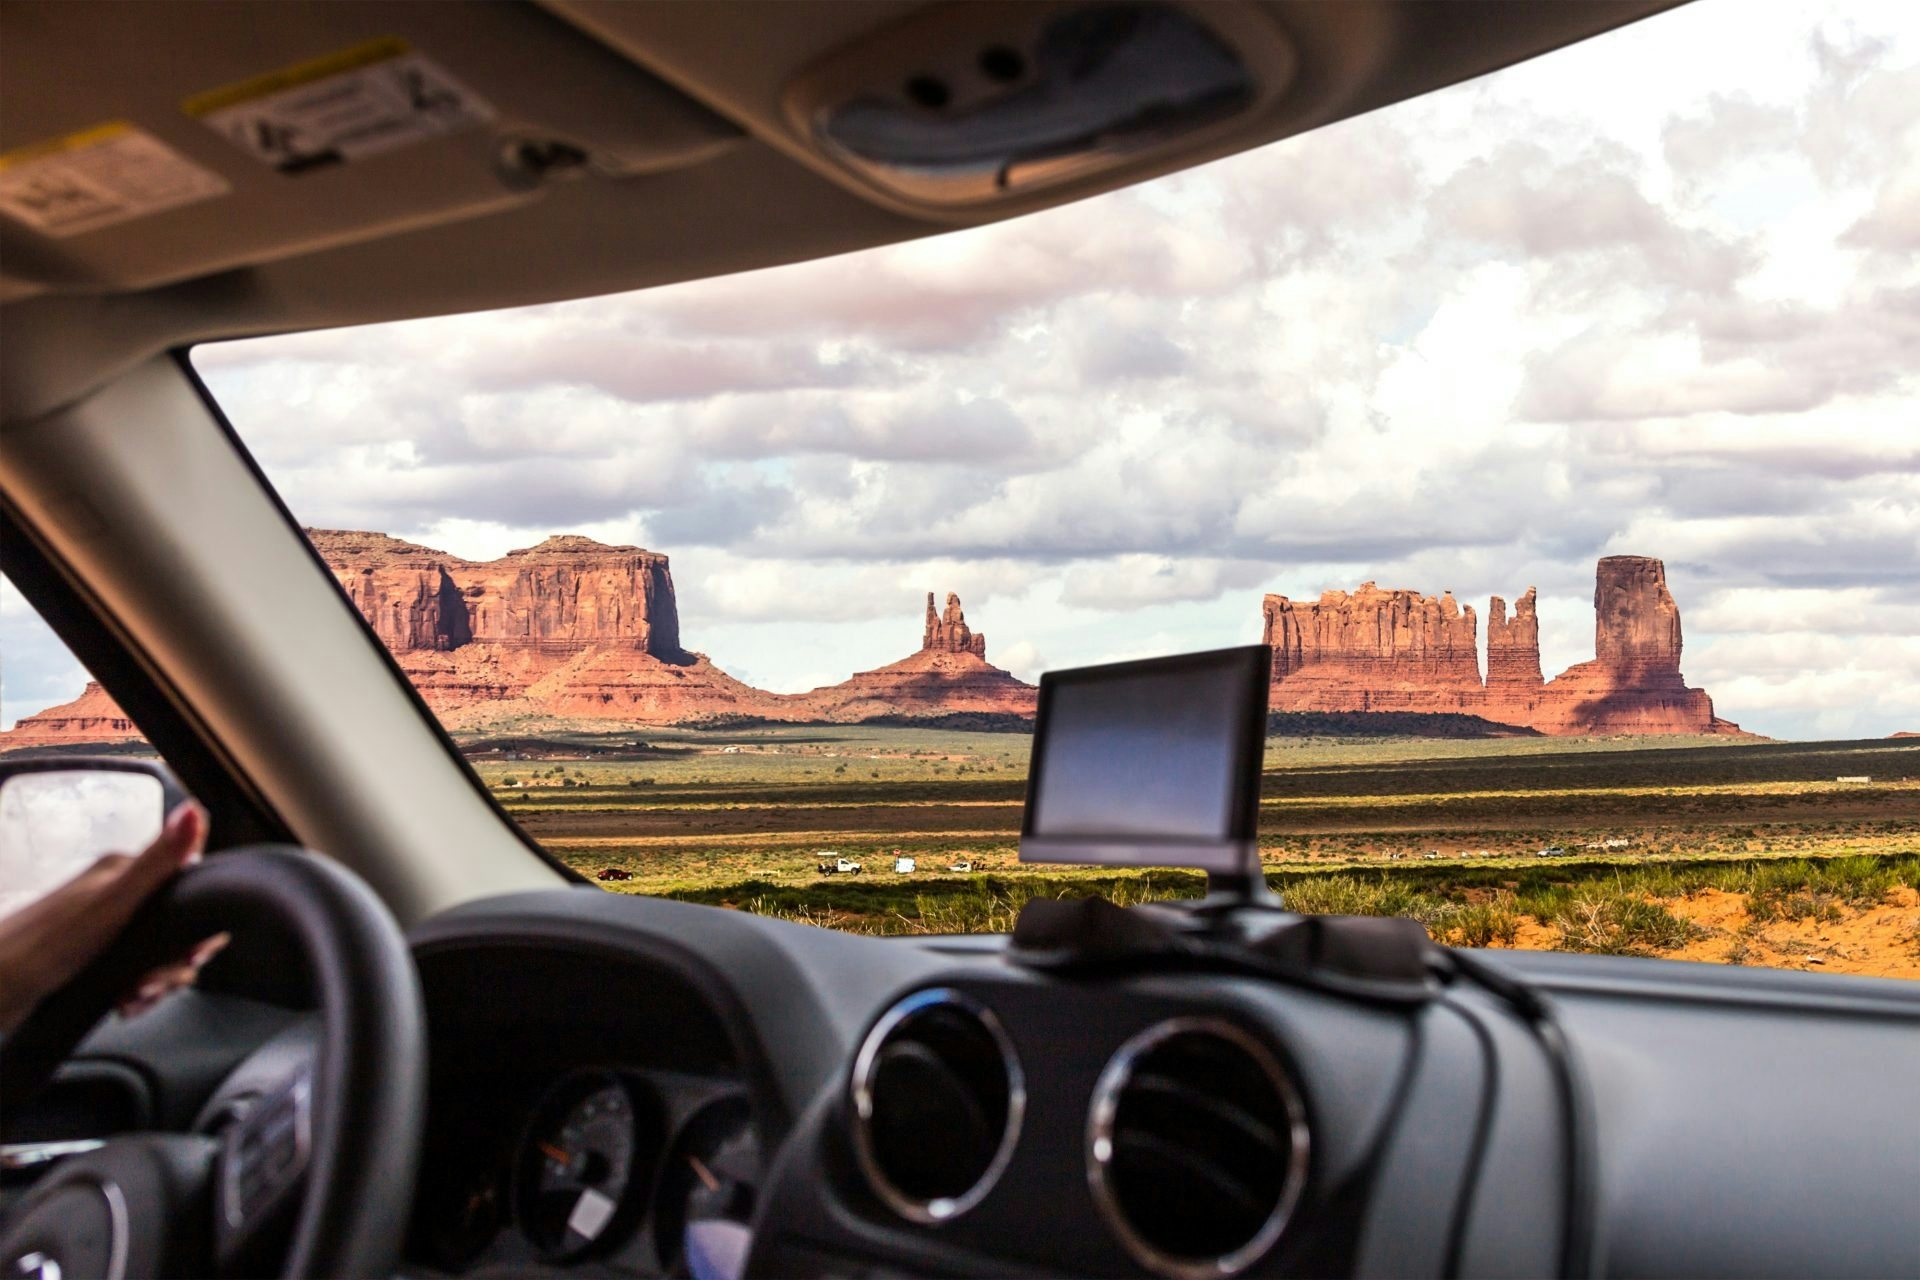 For Chinese travelers, the United States is the most attractive destination for self-drive tourism. (Shutterstock)